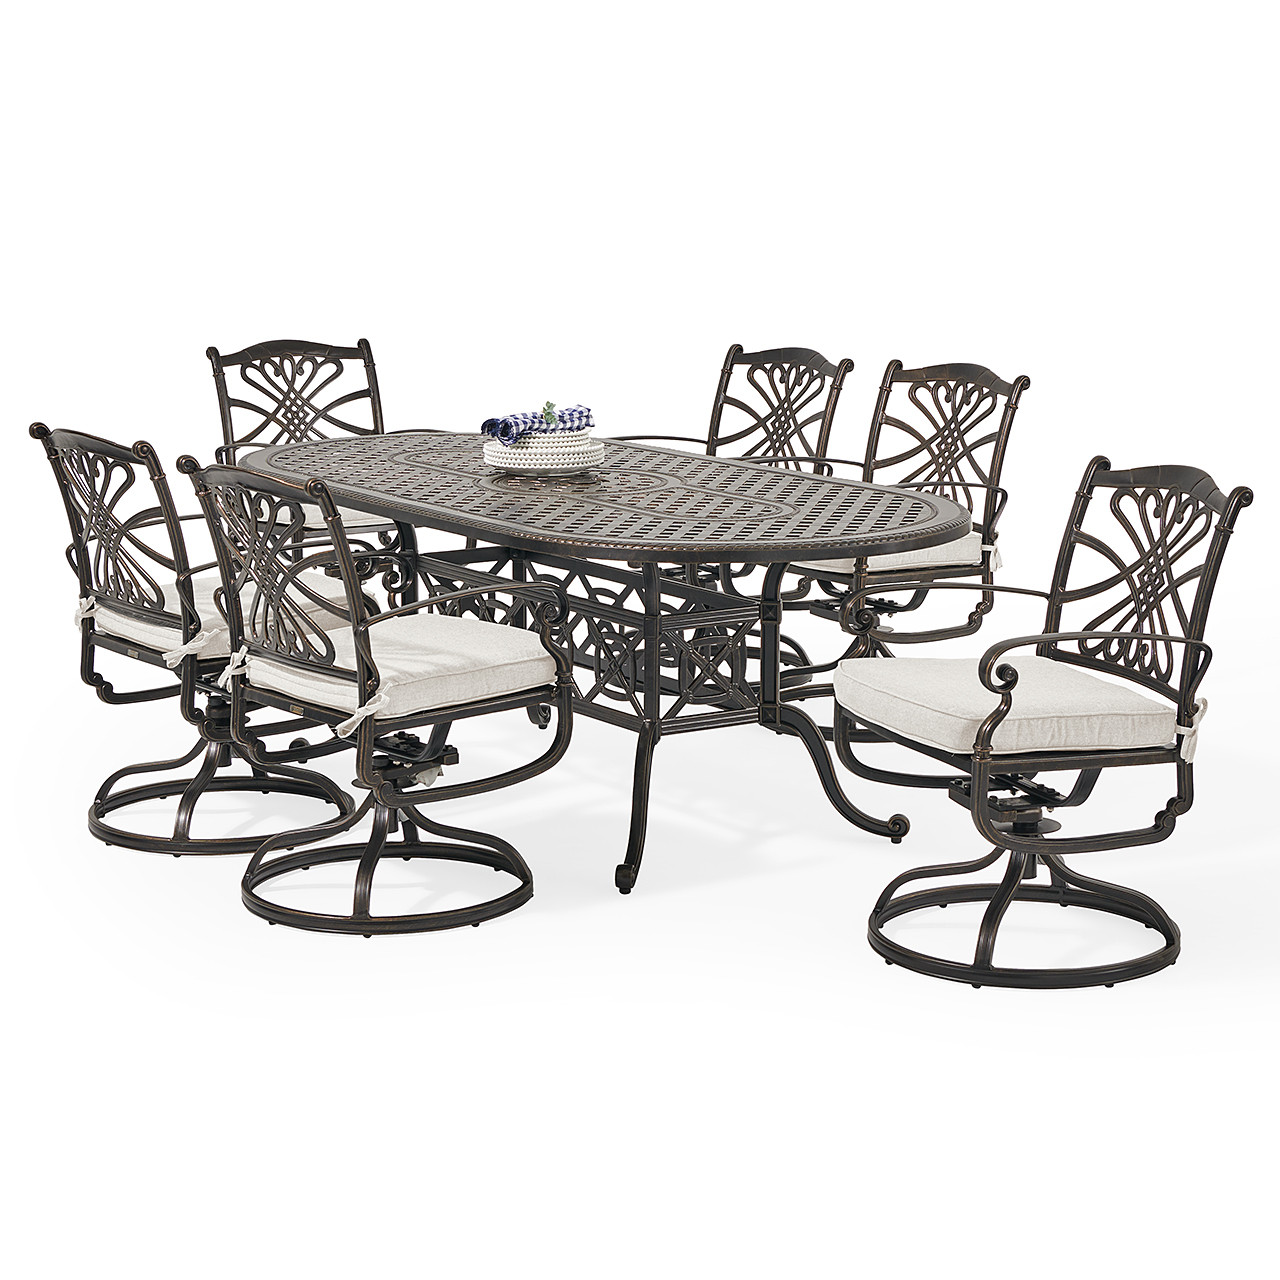 Melrose Midnight Gold Cast Aluminum with Cushions 7 Piece Swivel Dining Set + 86 x 42 in. Table